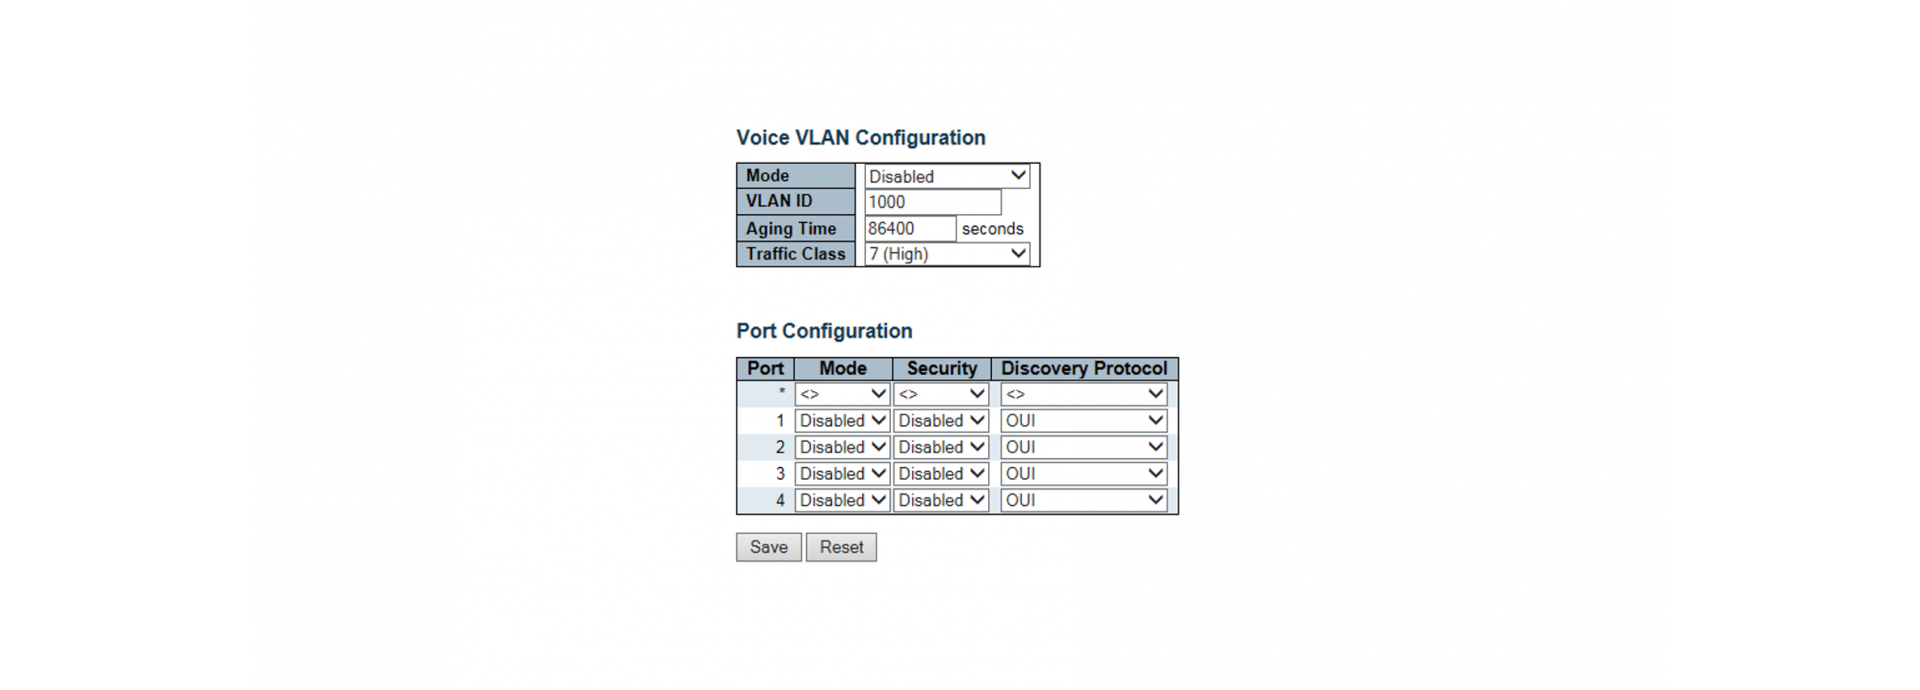 VLAN Policy for Voice – set in high priority to avoid of voice lag